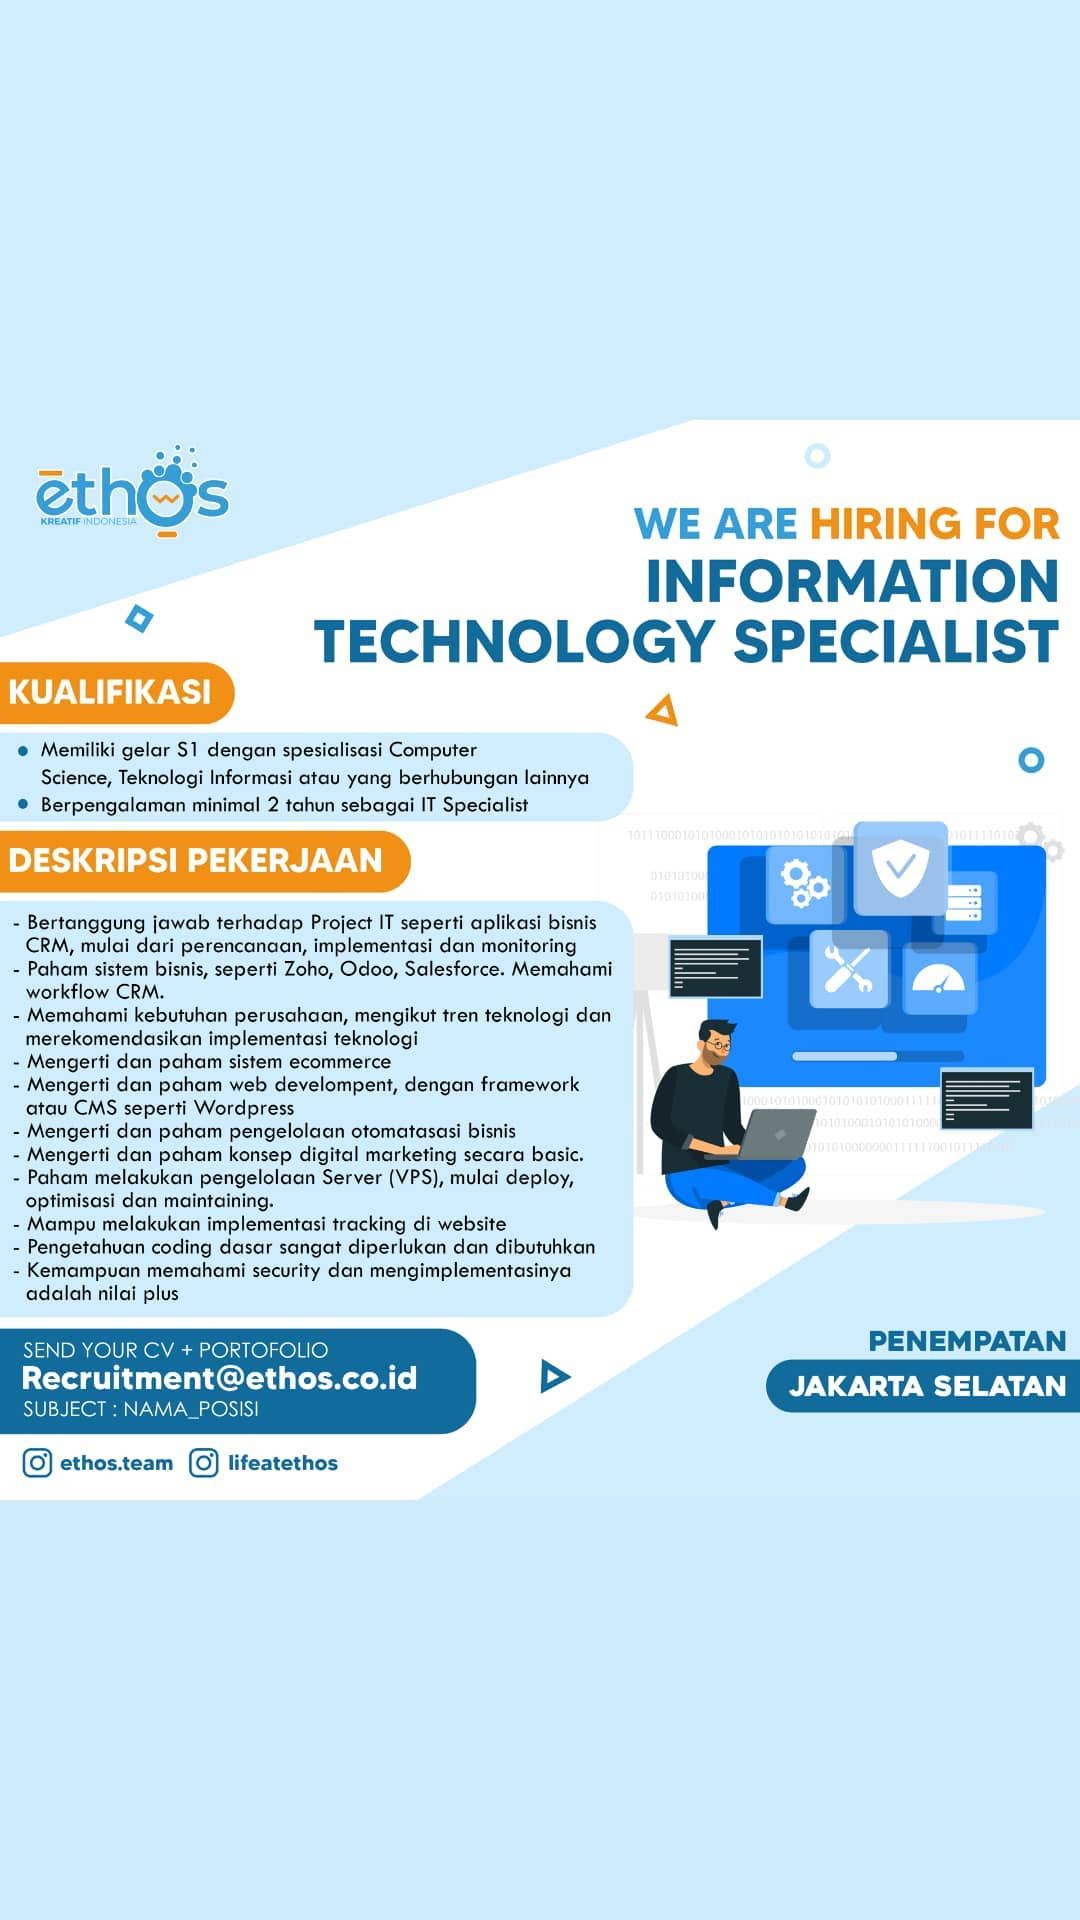 TECHNOLOGY SPECIALIST